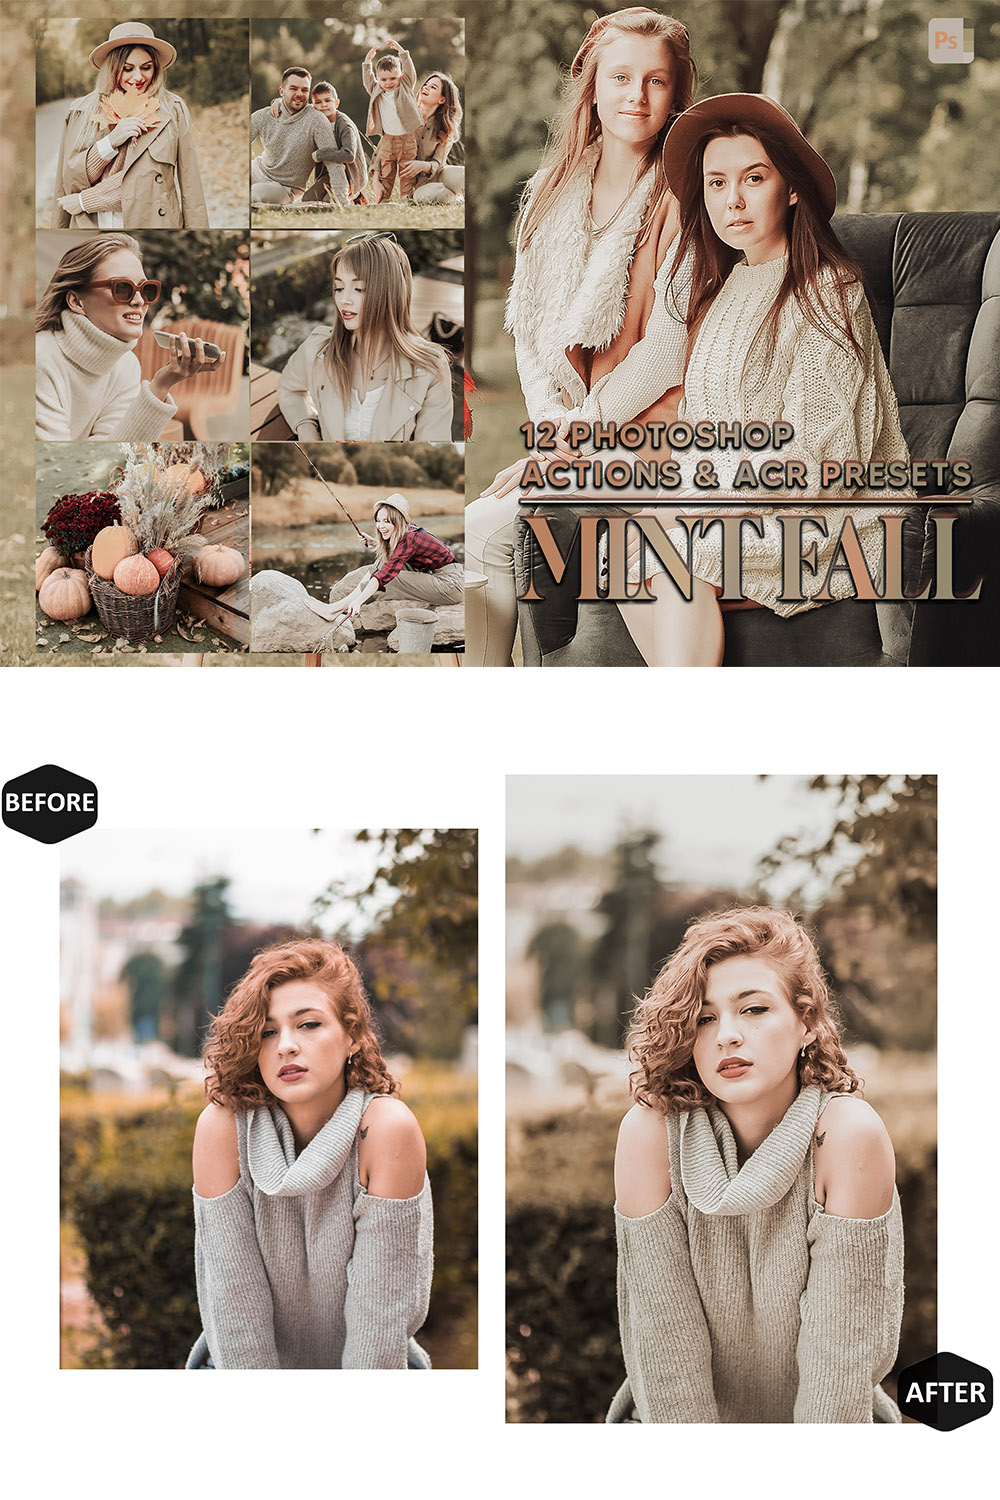 12 Photoshop Actions, Mint Fall Ps Action, Autumn Green ACR Preset, Cream Ps Filter, Atn Portrait And Lifestyle Theme For Instagram, Blogger pinterest preview image.